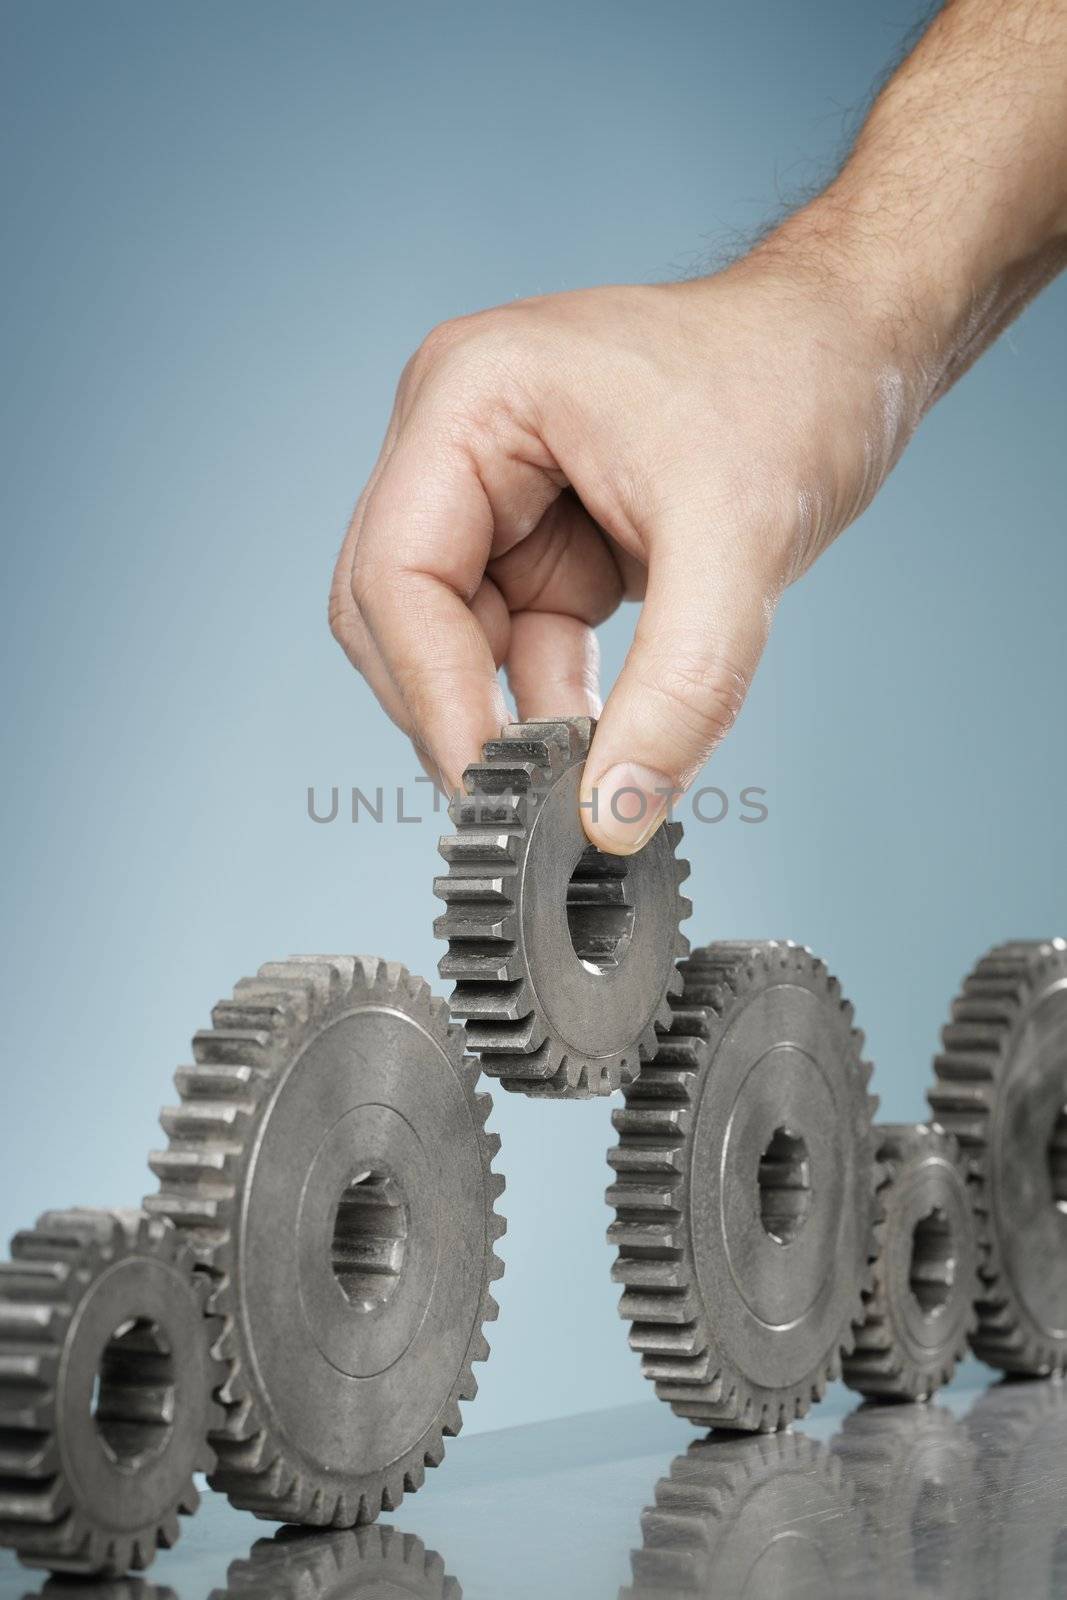 Man adding a cog gear wheel into a row of old cogs.